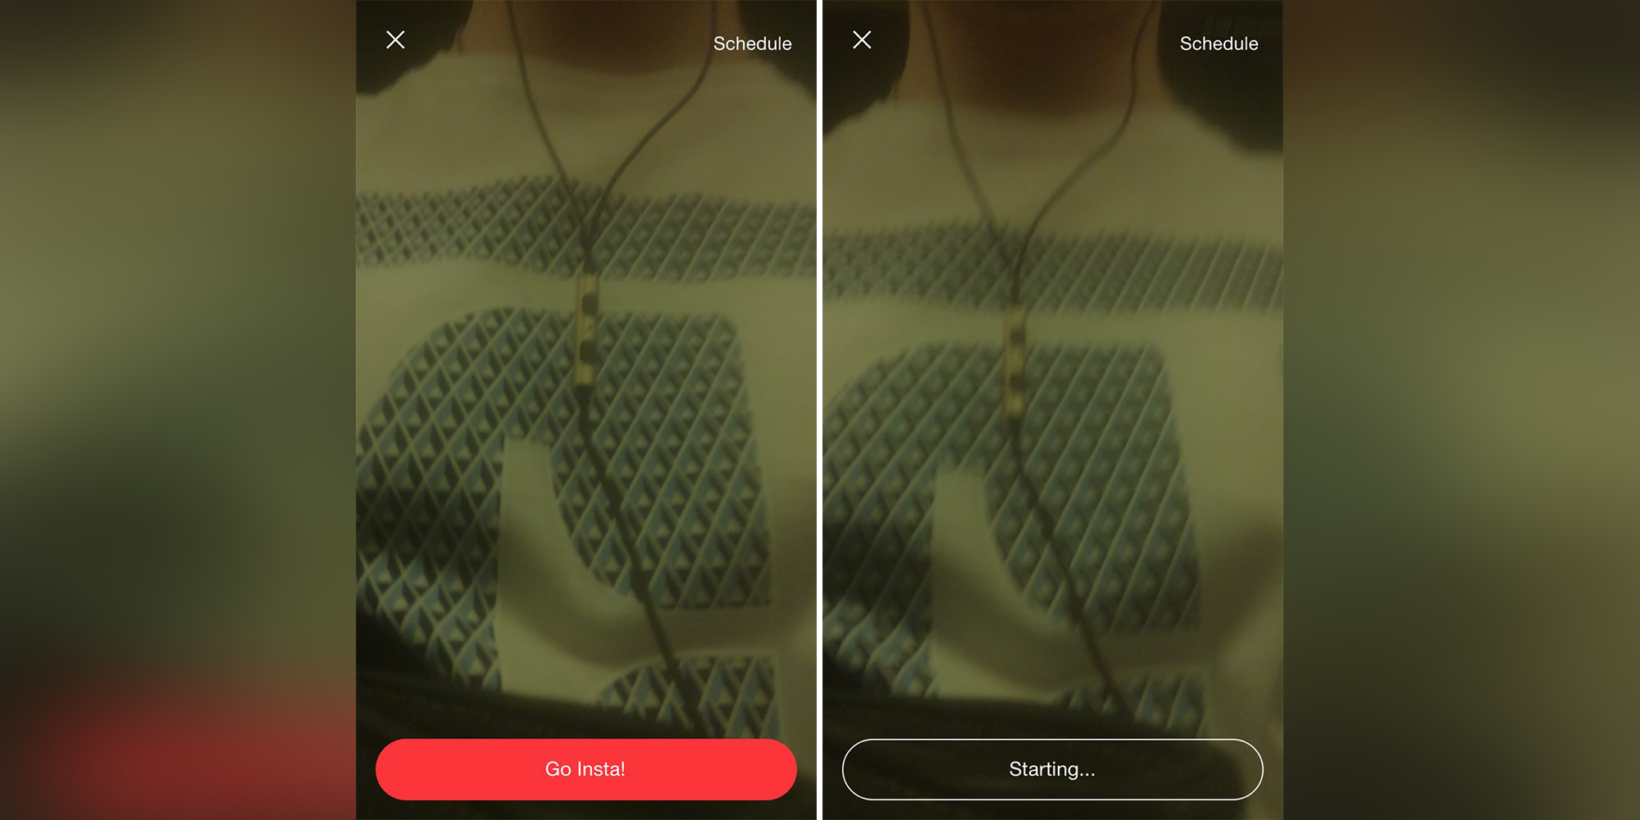 How to go live on instagram? step by step guide with images, how to go live on instagram,how to go live on instagram on android,how to go live on instagram on iphone,how to go on instagram live